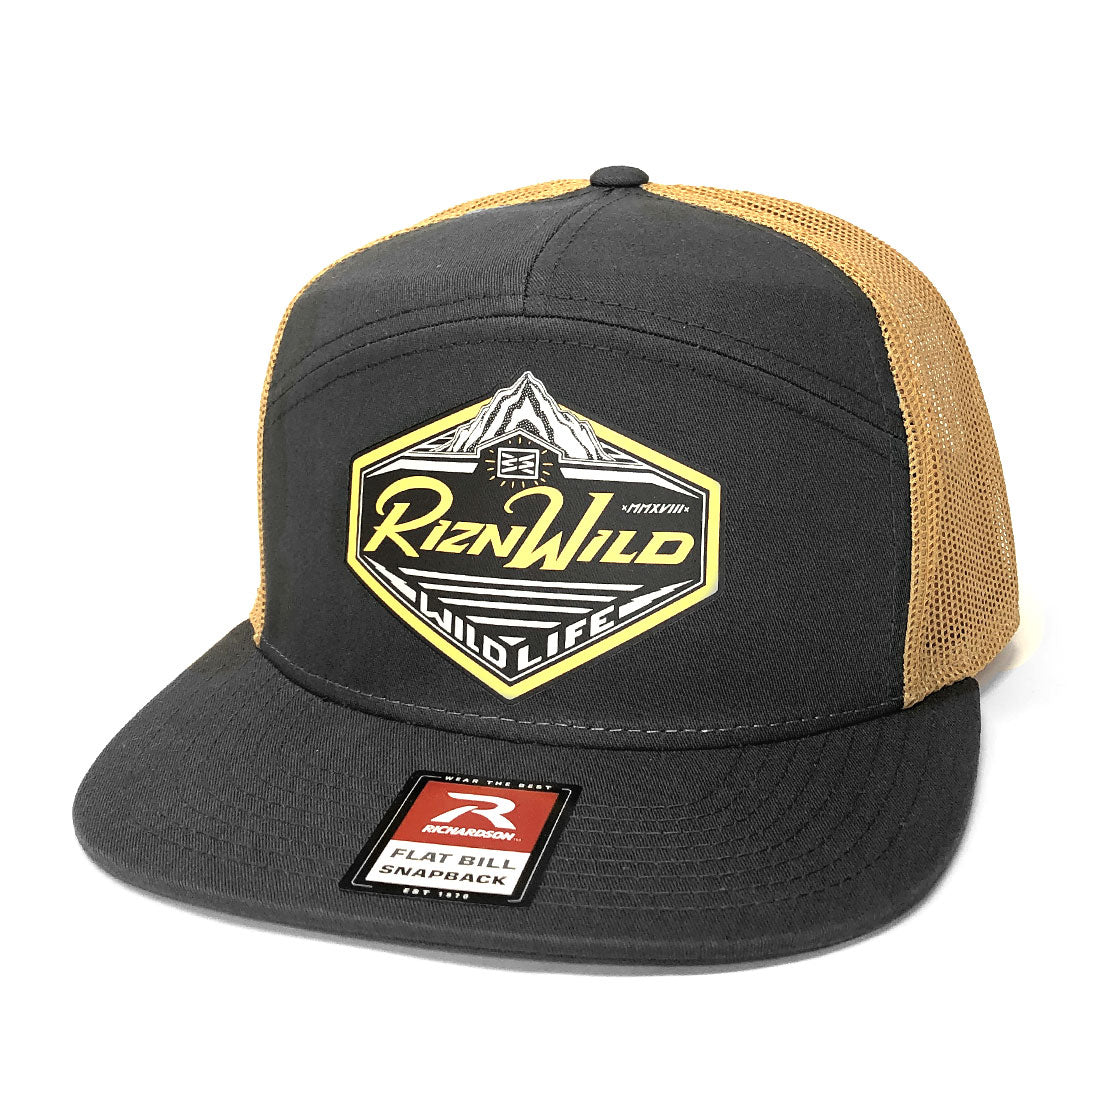 riznwild gold and charcoal mountain trucker hat